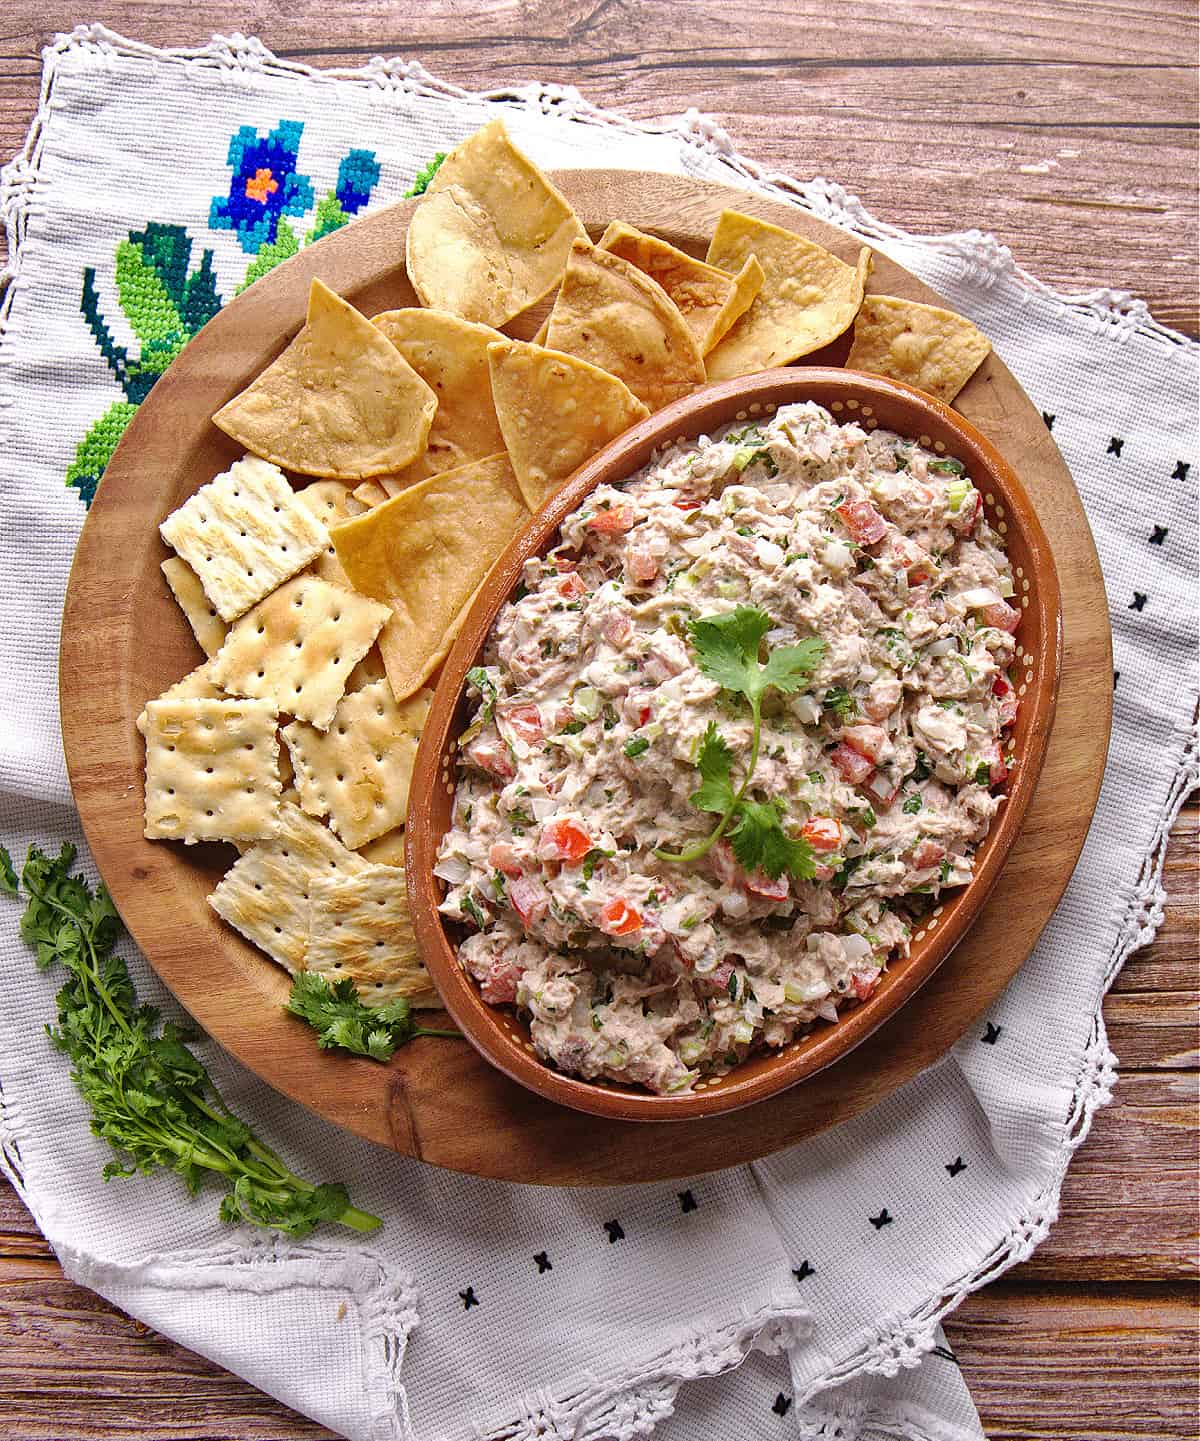 Ensalada de Atún served in a clay bowl and surrounded by chips and saltine crackers.